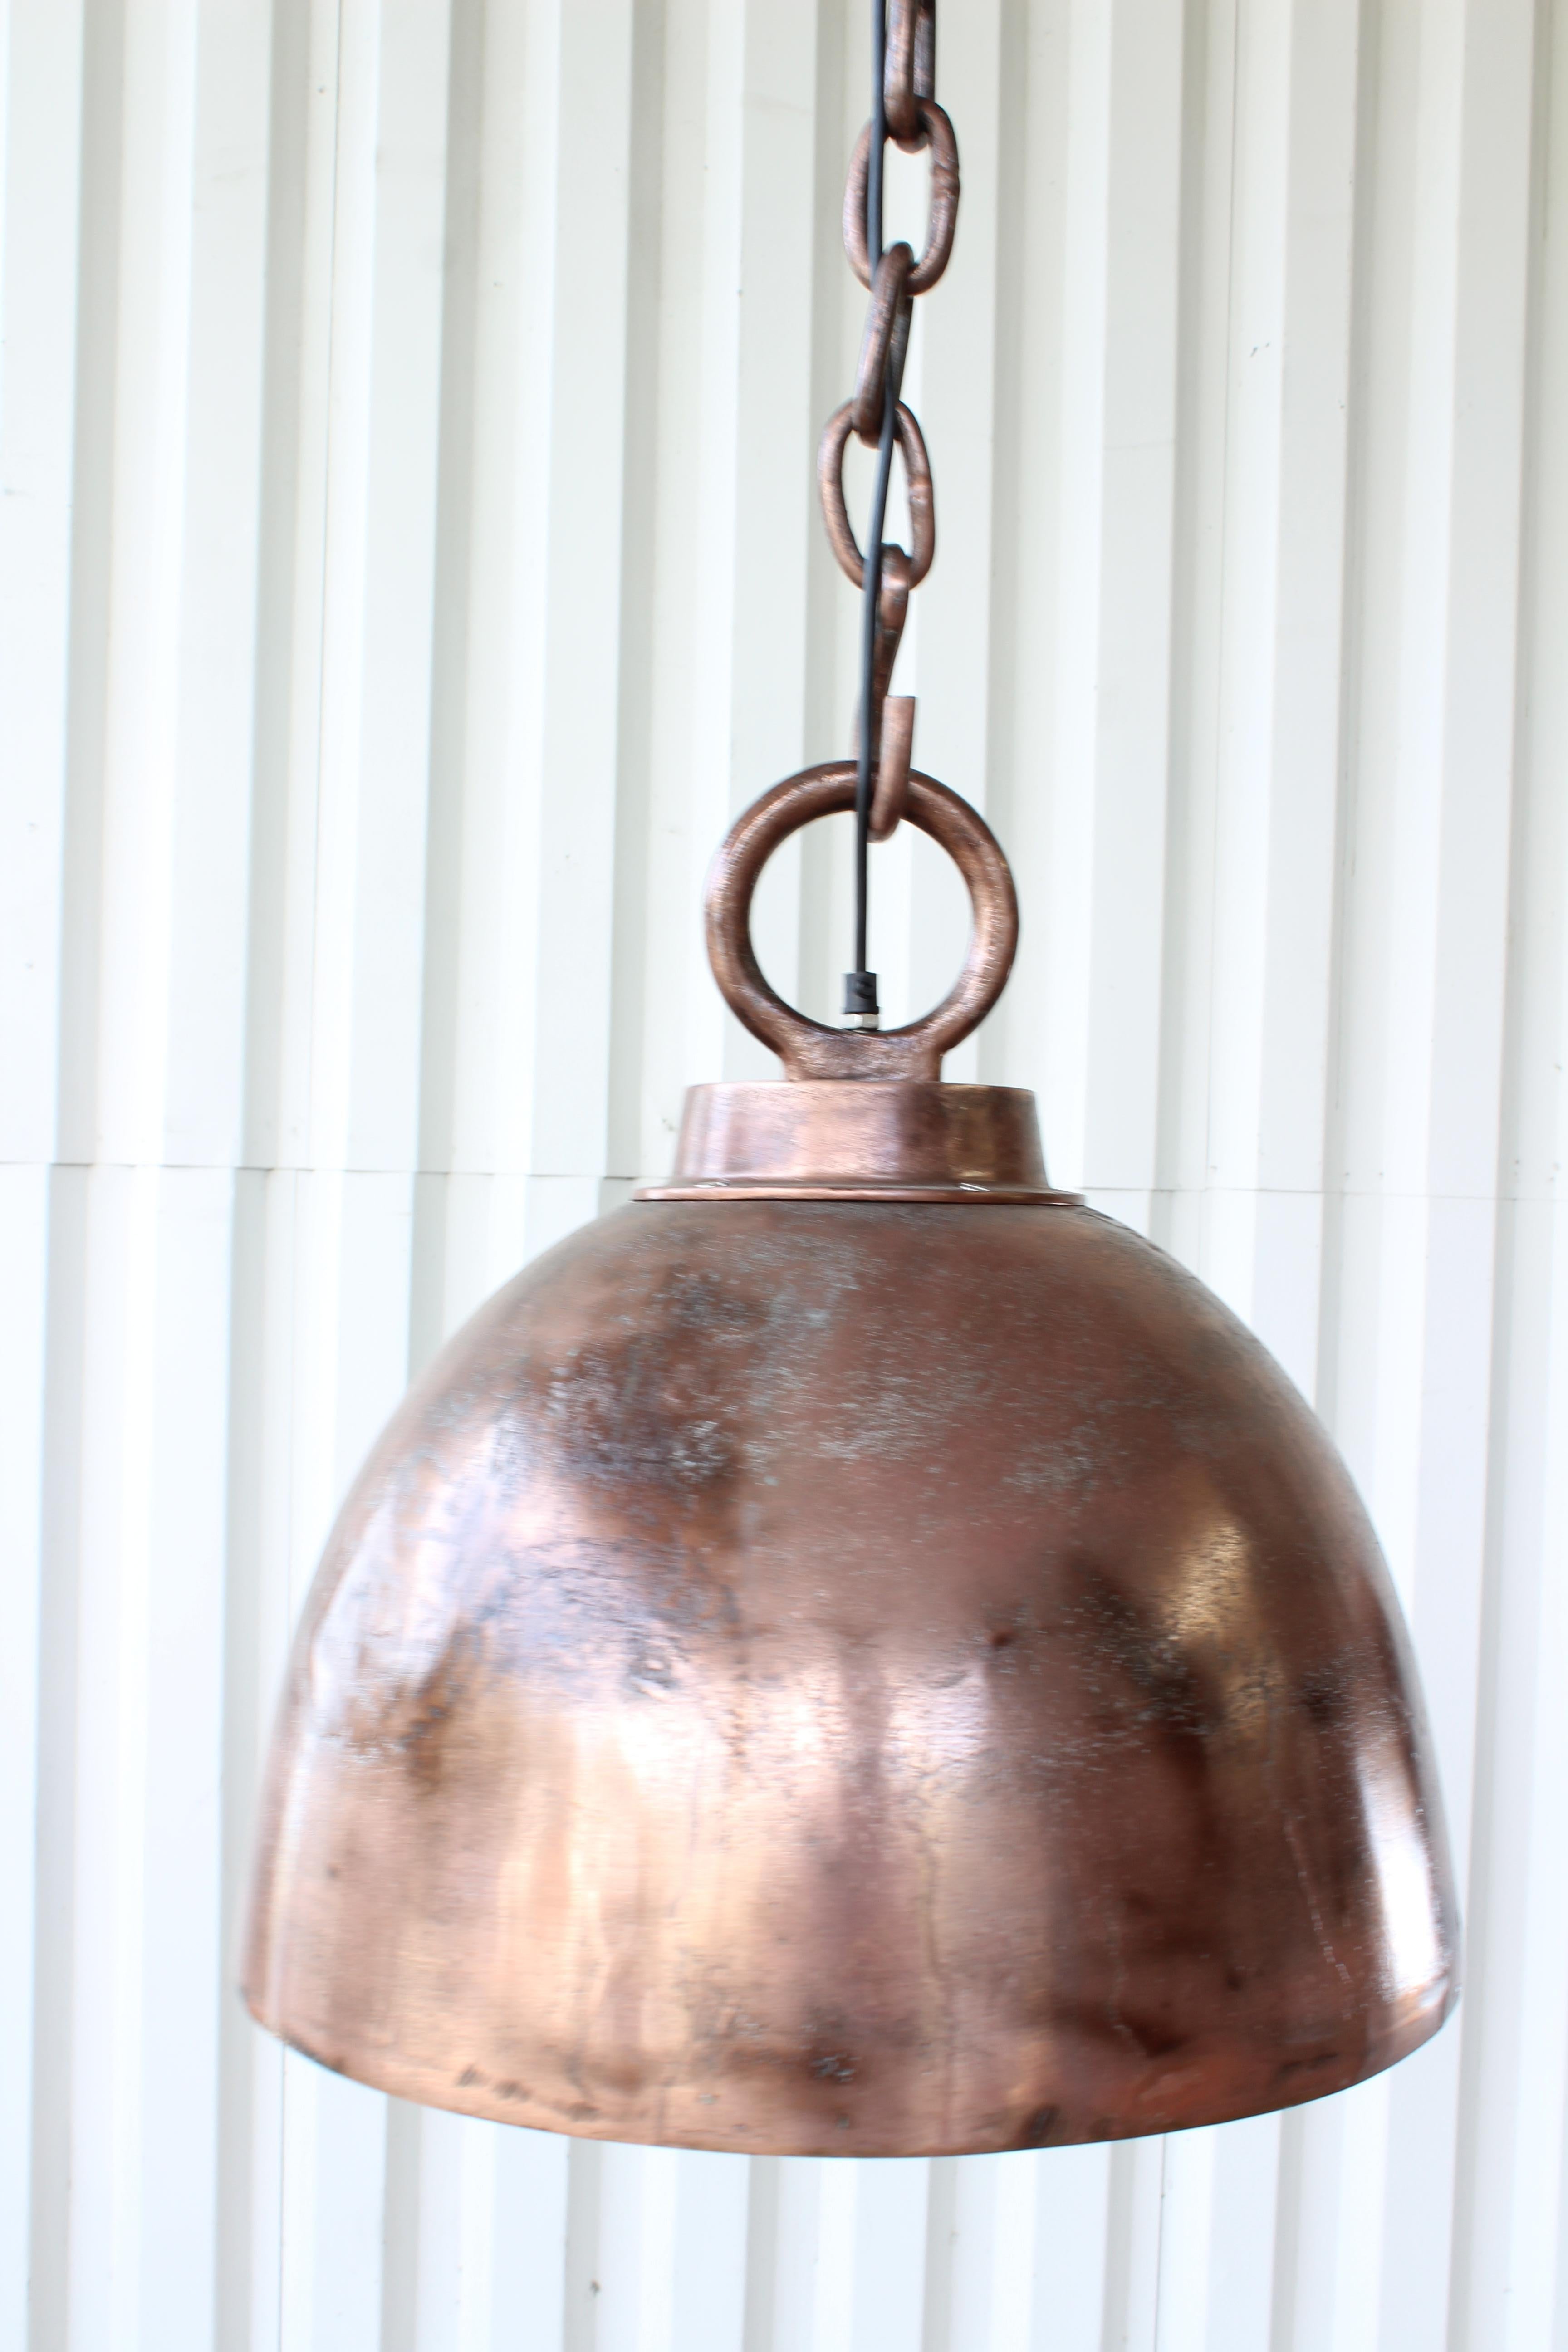 Metal pendant light in antique copper finish. Newer production with a vintage look. 62